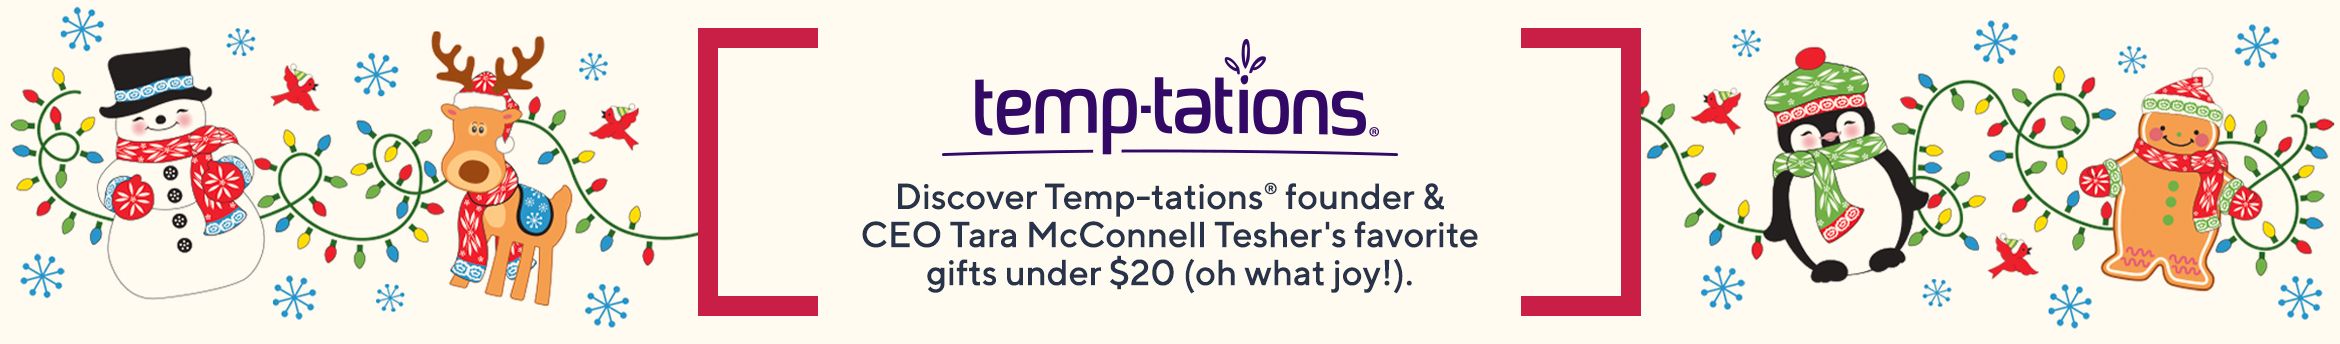 Temp-tations®  Discover Temp-tations® founder & CEO Tara McConnell Tesher's favorite gifts under $20 (oh what joy!). 